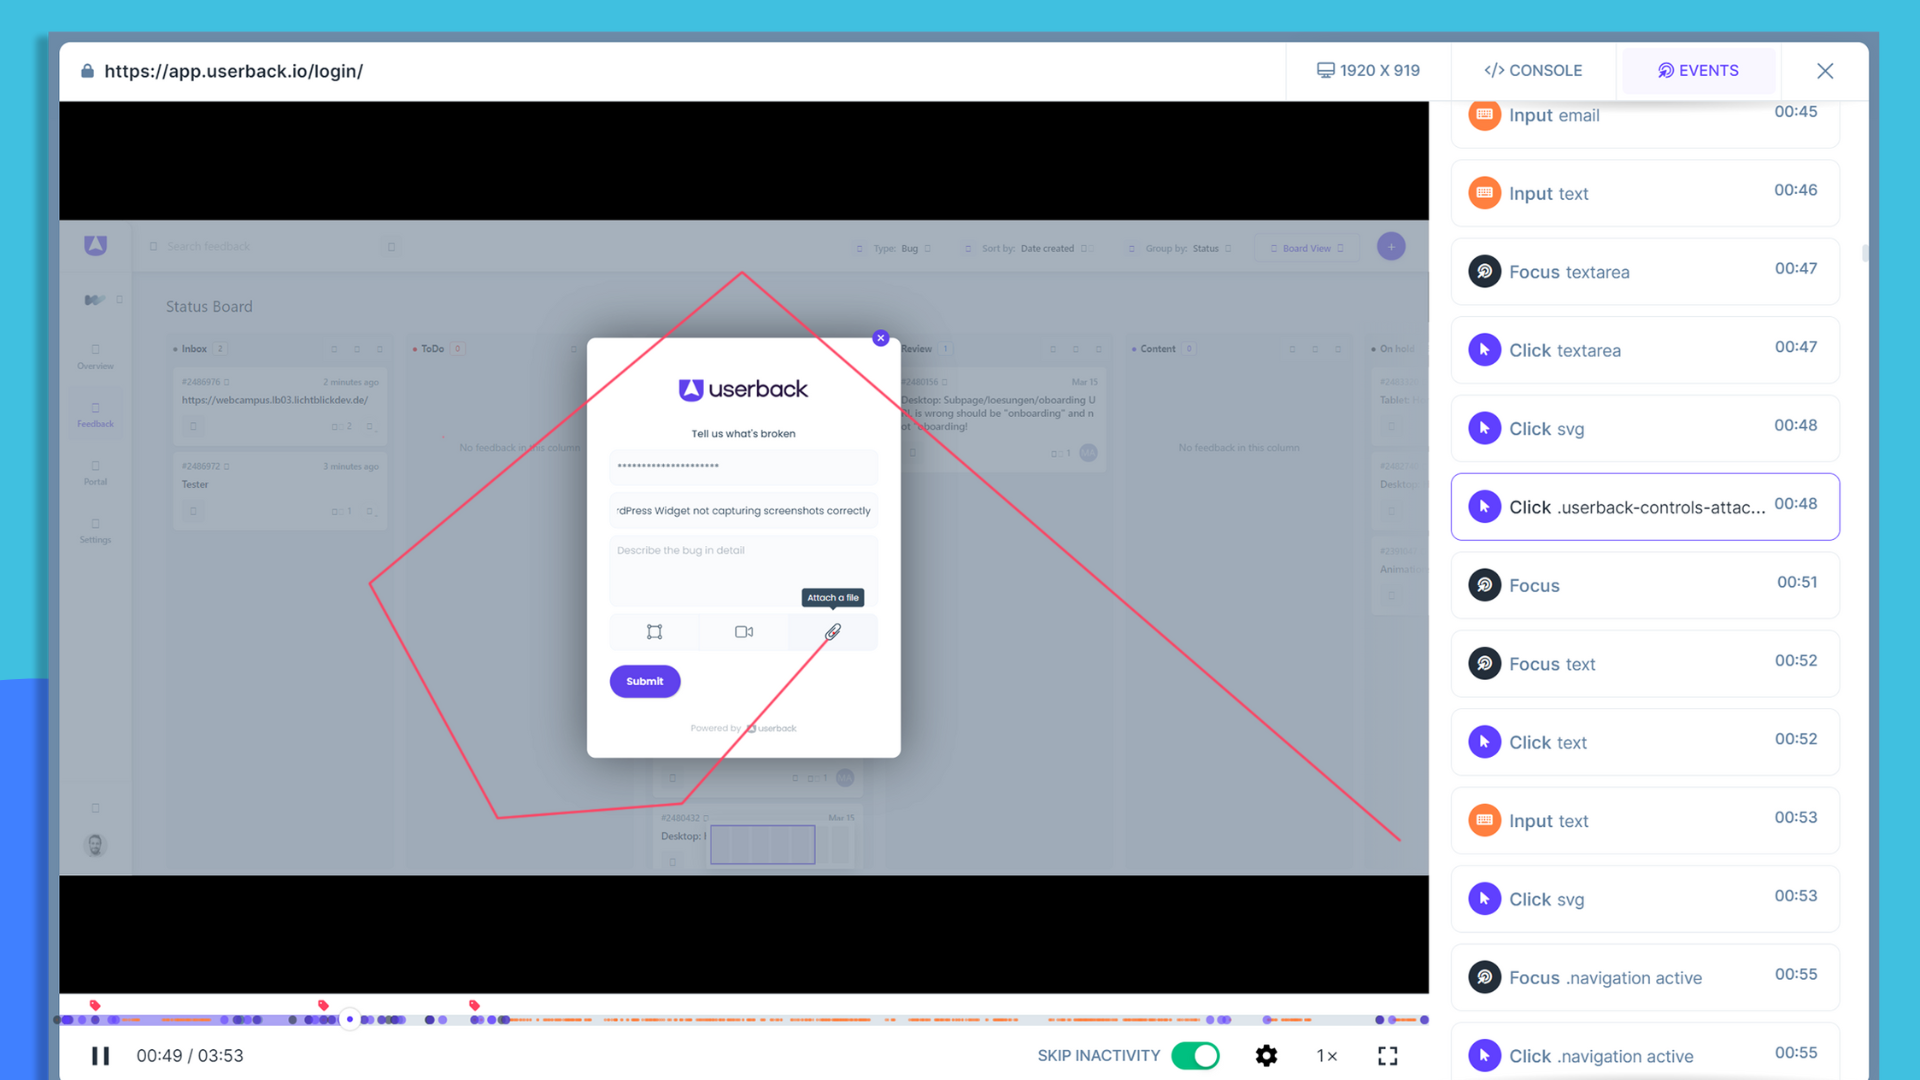 Watch it back to understand user behavior with full session replays. From the moment of login in, sessions are captured and stored. So you can understand the why, not just the what.